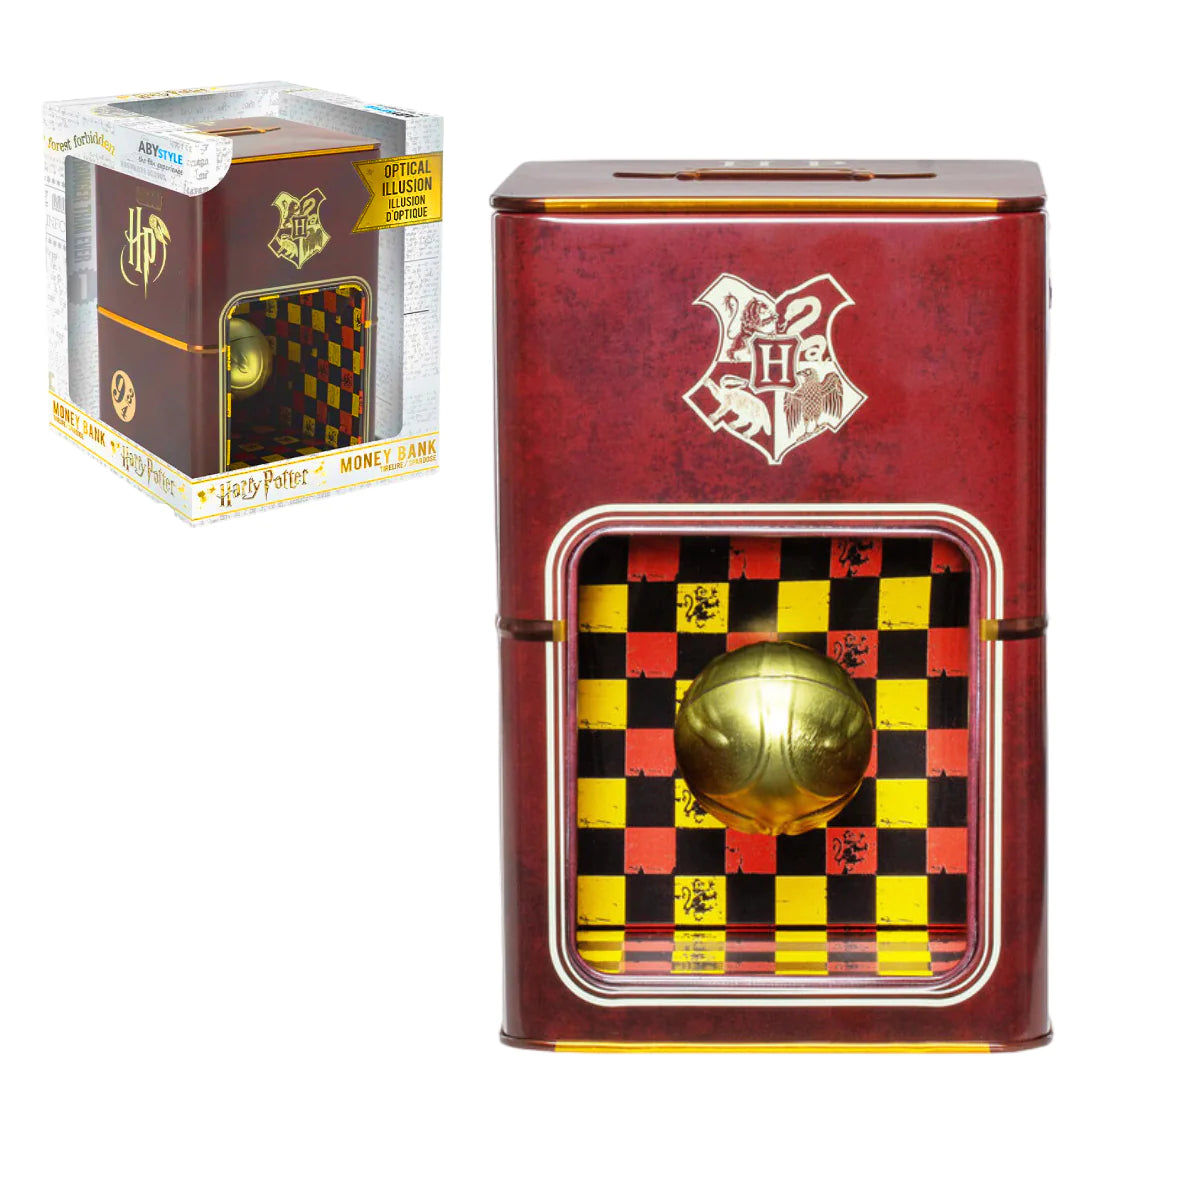 Abystyle Harry Potter - Coin Bank - Optical Illusion